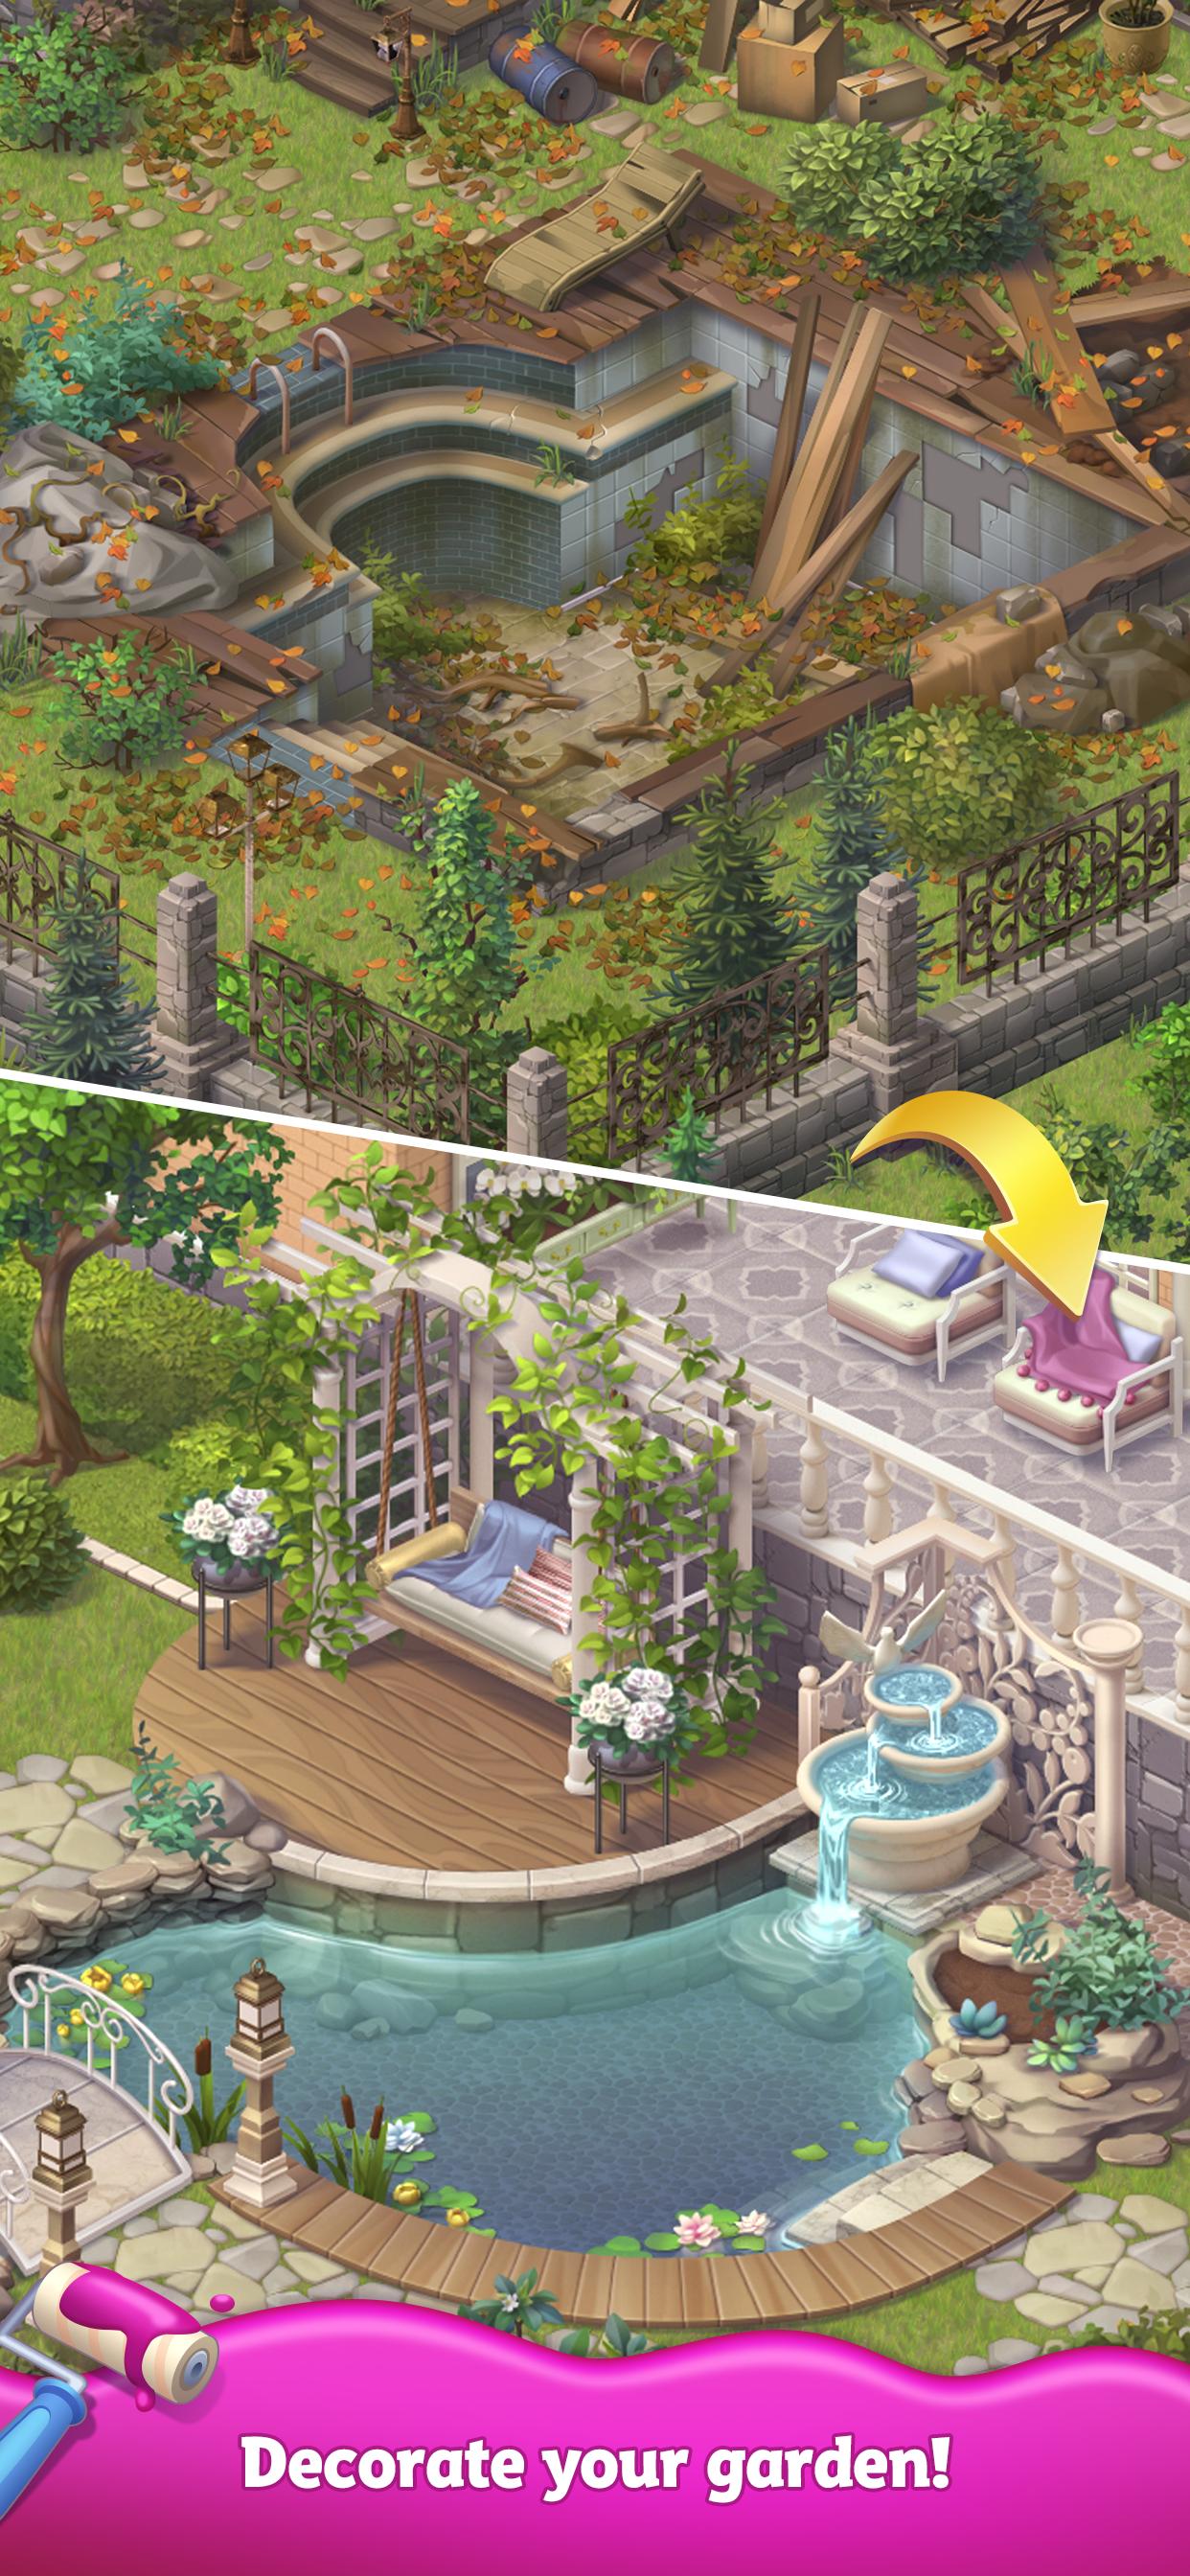 Merge Matters Home renovation game with a twist 8.8.03 Screenshot 4